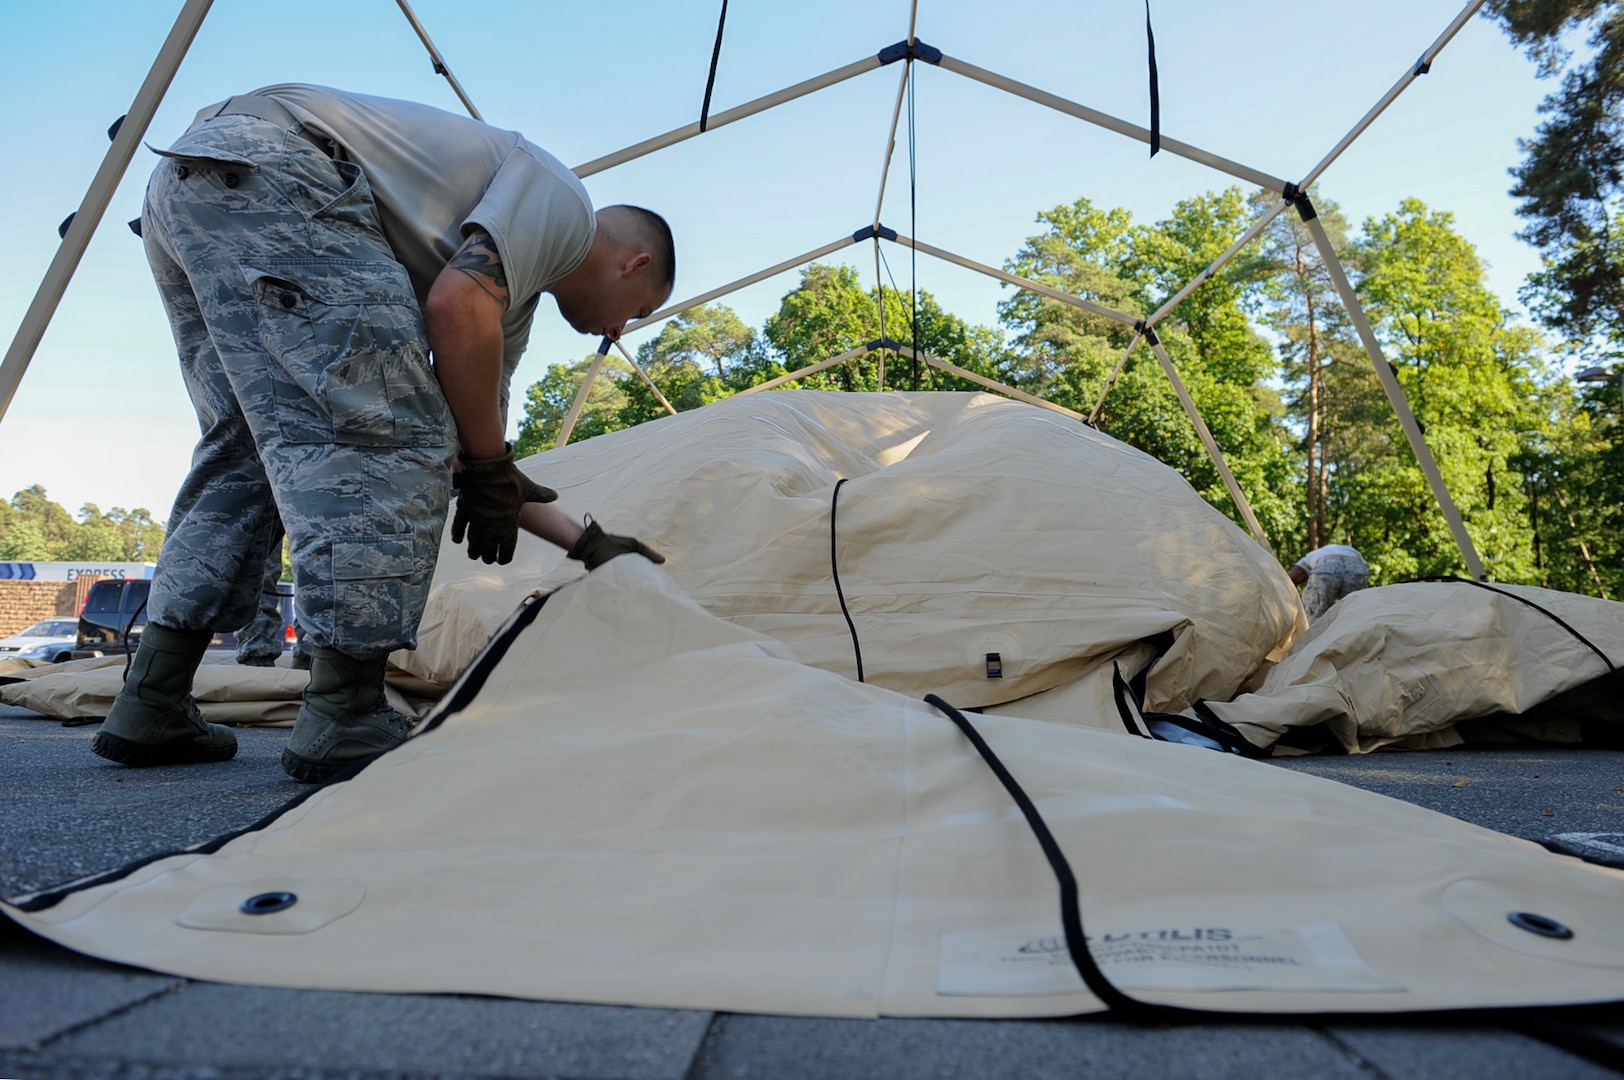 Staff Sgt. Franklin Dover, 86th Medical Support Squadron war reserve material crew chief, straightens the door of a tent being cleaned at Ramstein Air Base, Germany, Sept. 29, 2016. WRM technicians are responsible for the maintenance and inventory of medical supplies.  (U.S. Air Force photo by Airman 1st Class Savannah L. Waters)